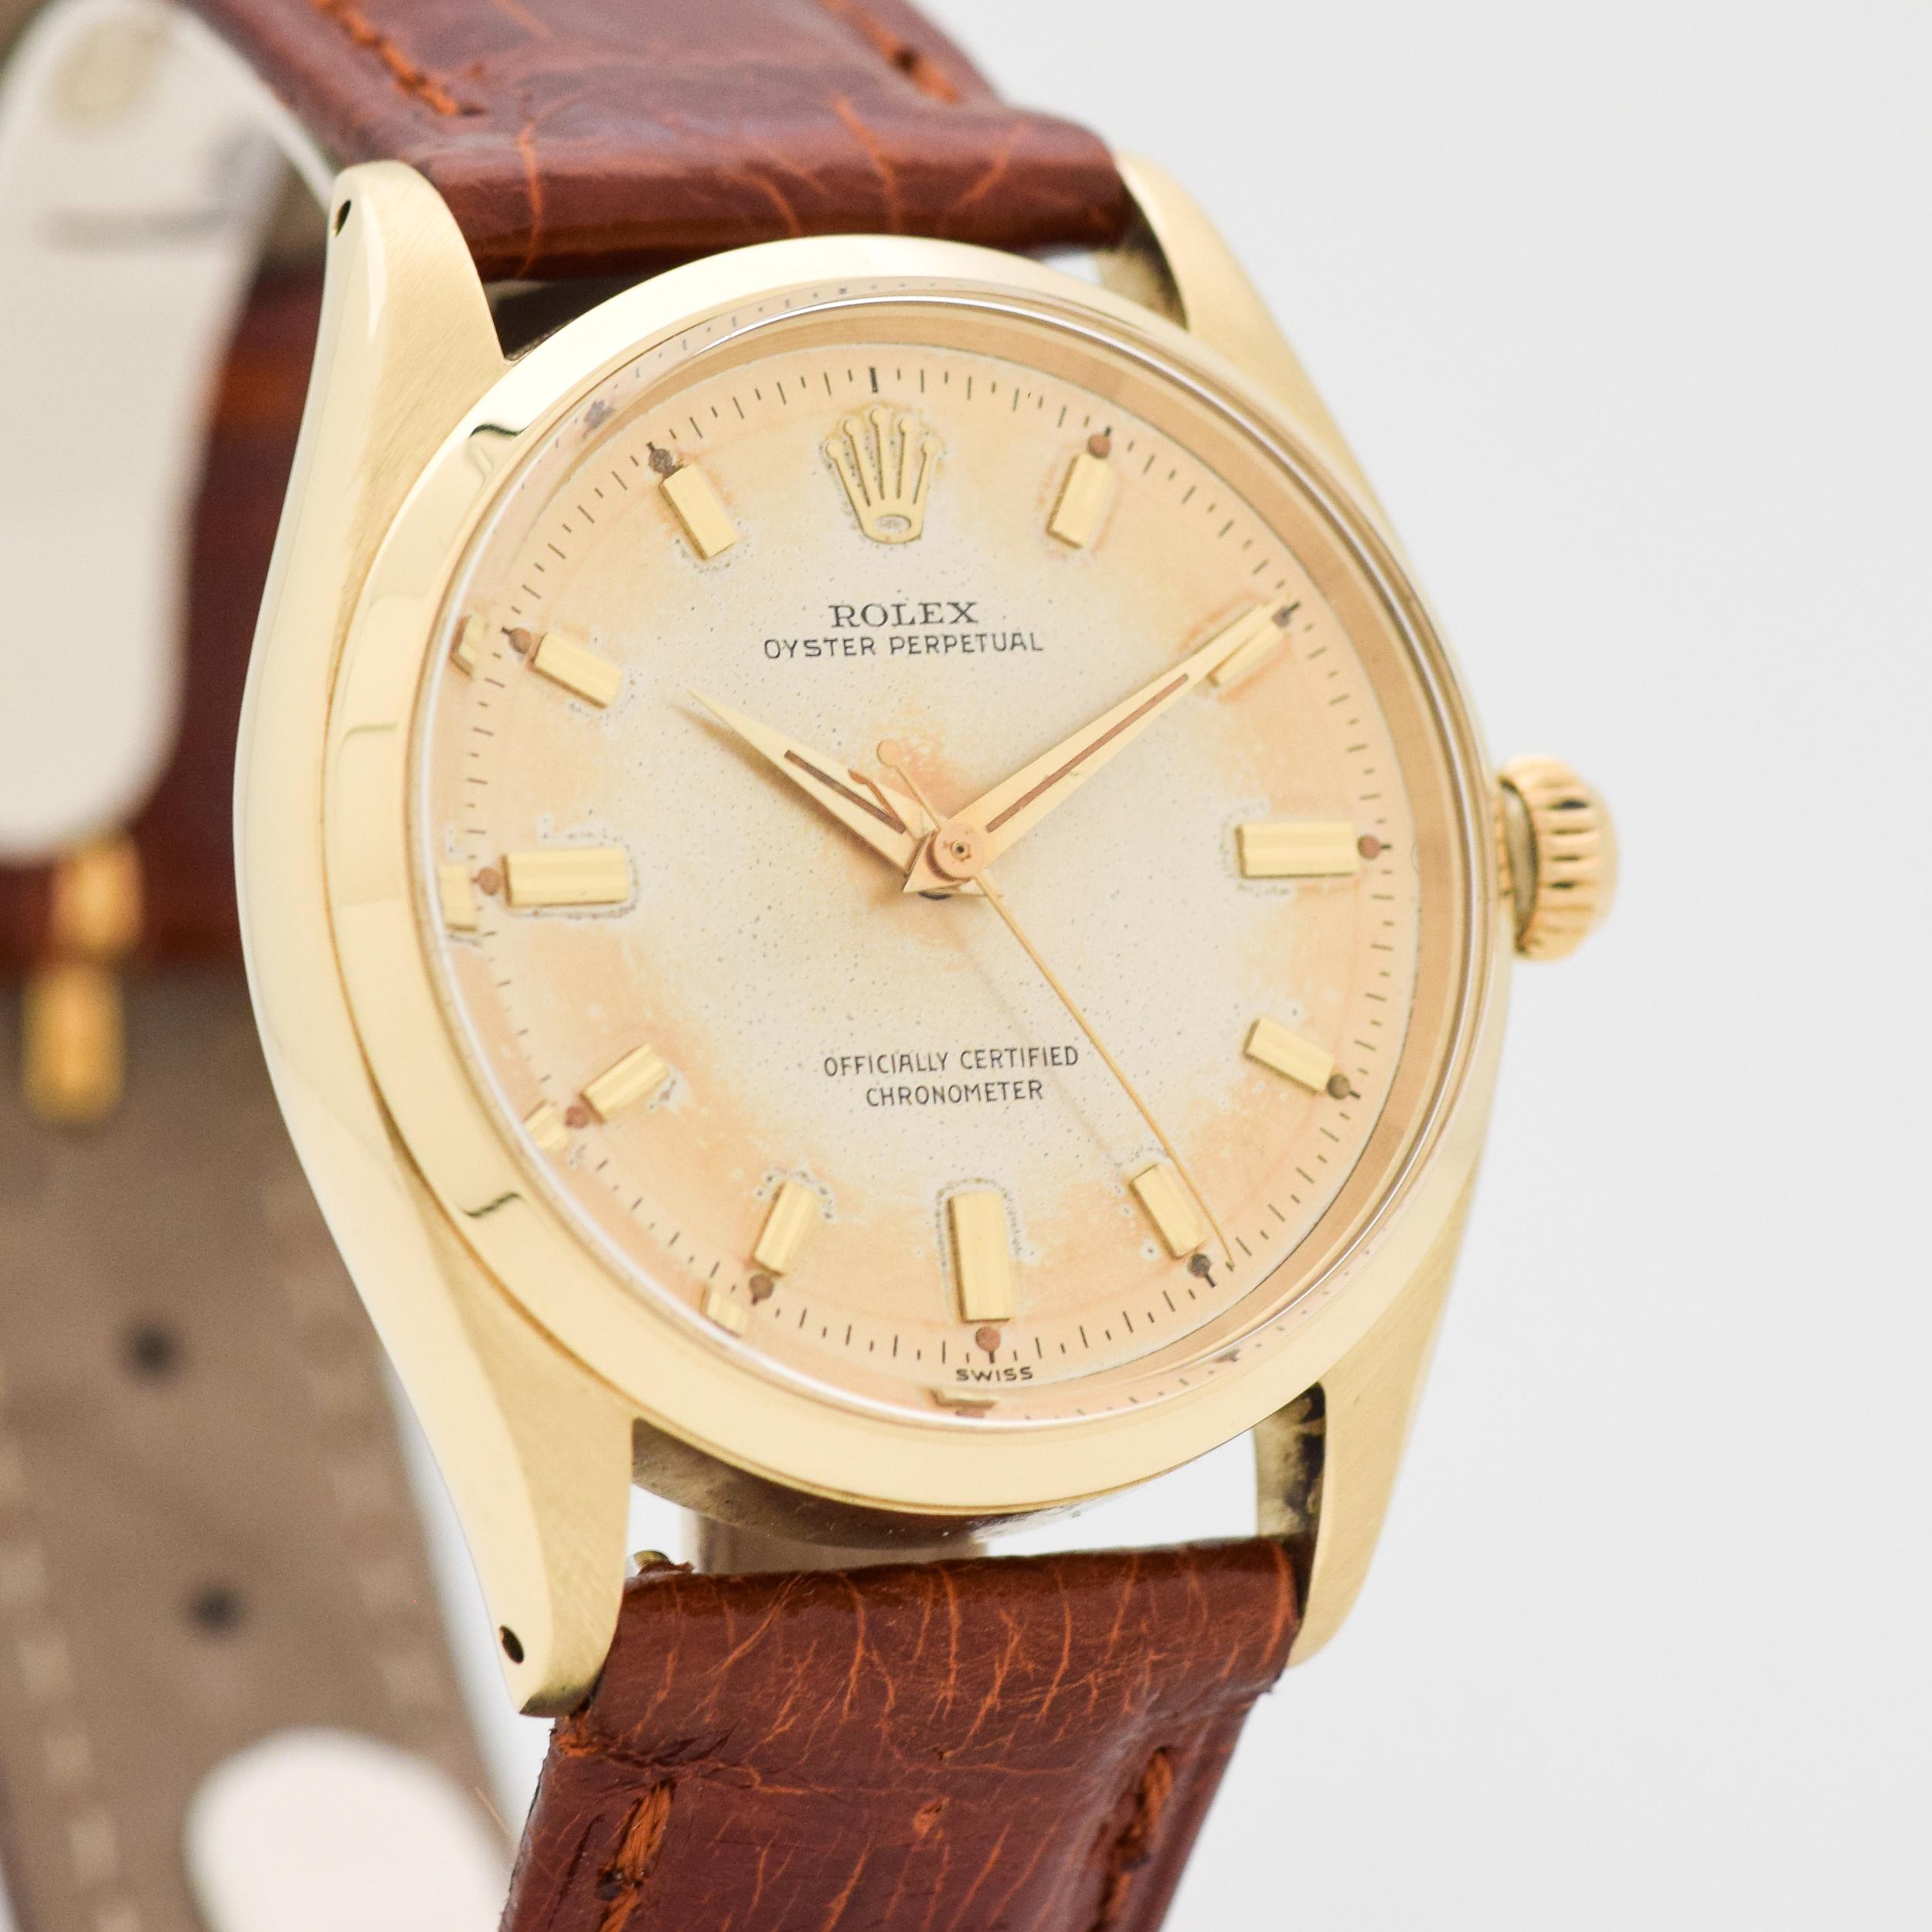 1955 Vintage Rolex Ouster Perpetual Ref. 6564 14k Yellow Gold with Original Silver Dial Turning Golden Brown with Applied Beveled Gold Stick/Bar/Baton Markers. Case size, 34mm x 38mm lug to lug (1.34 in. x 1.5 in.) - Powered by a 25-jewel, automatic